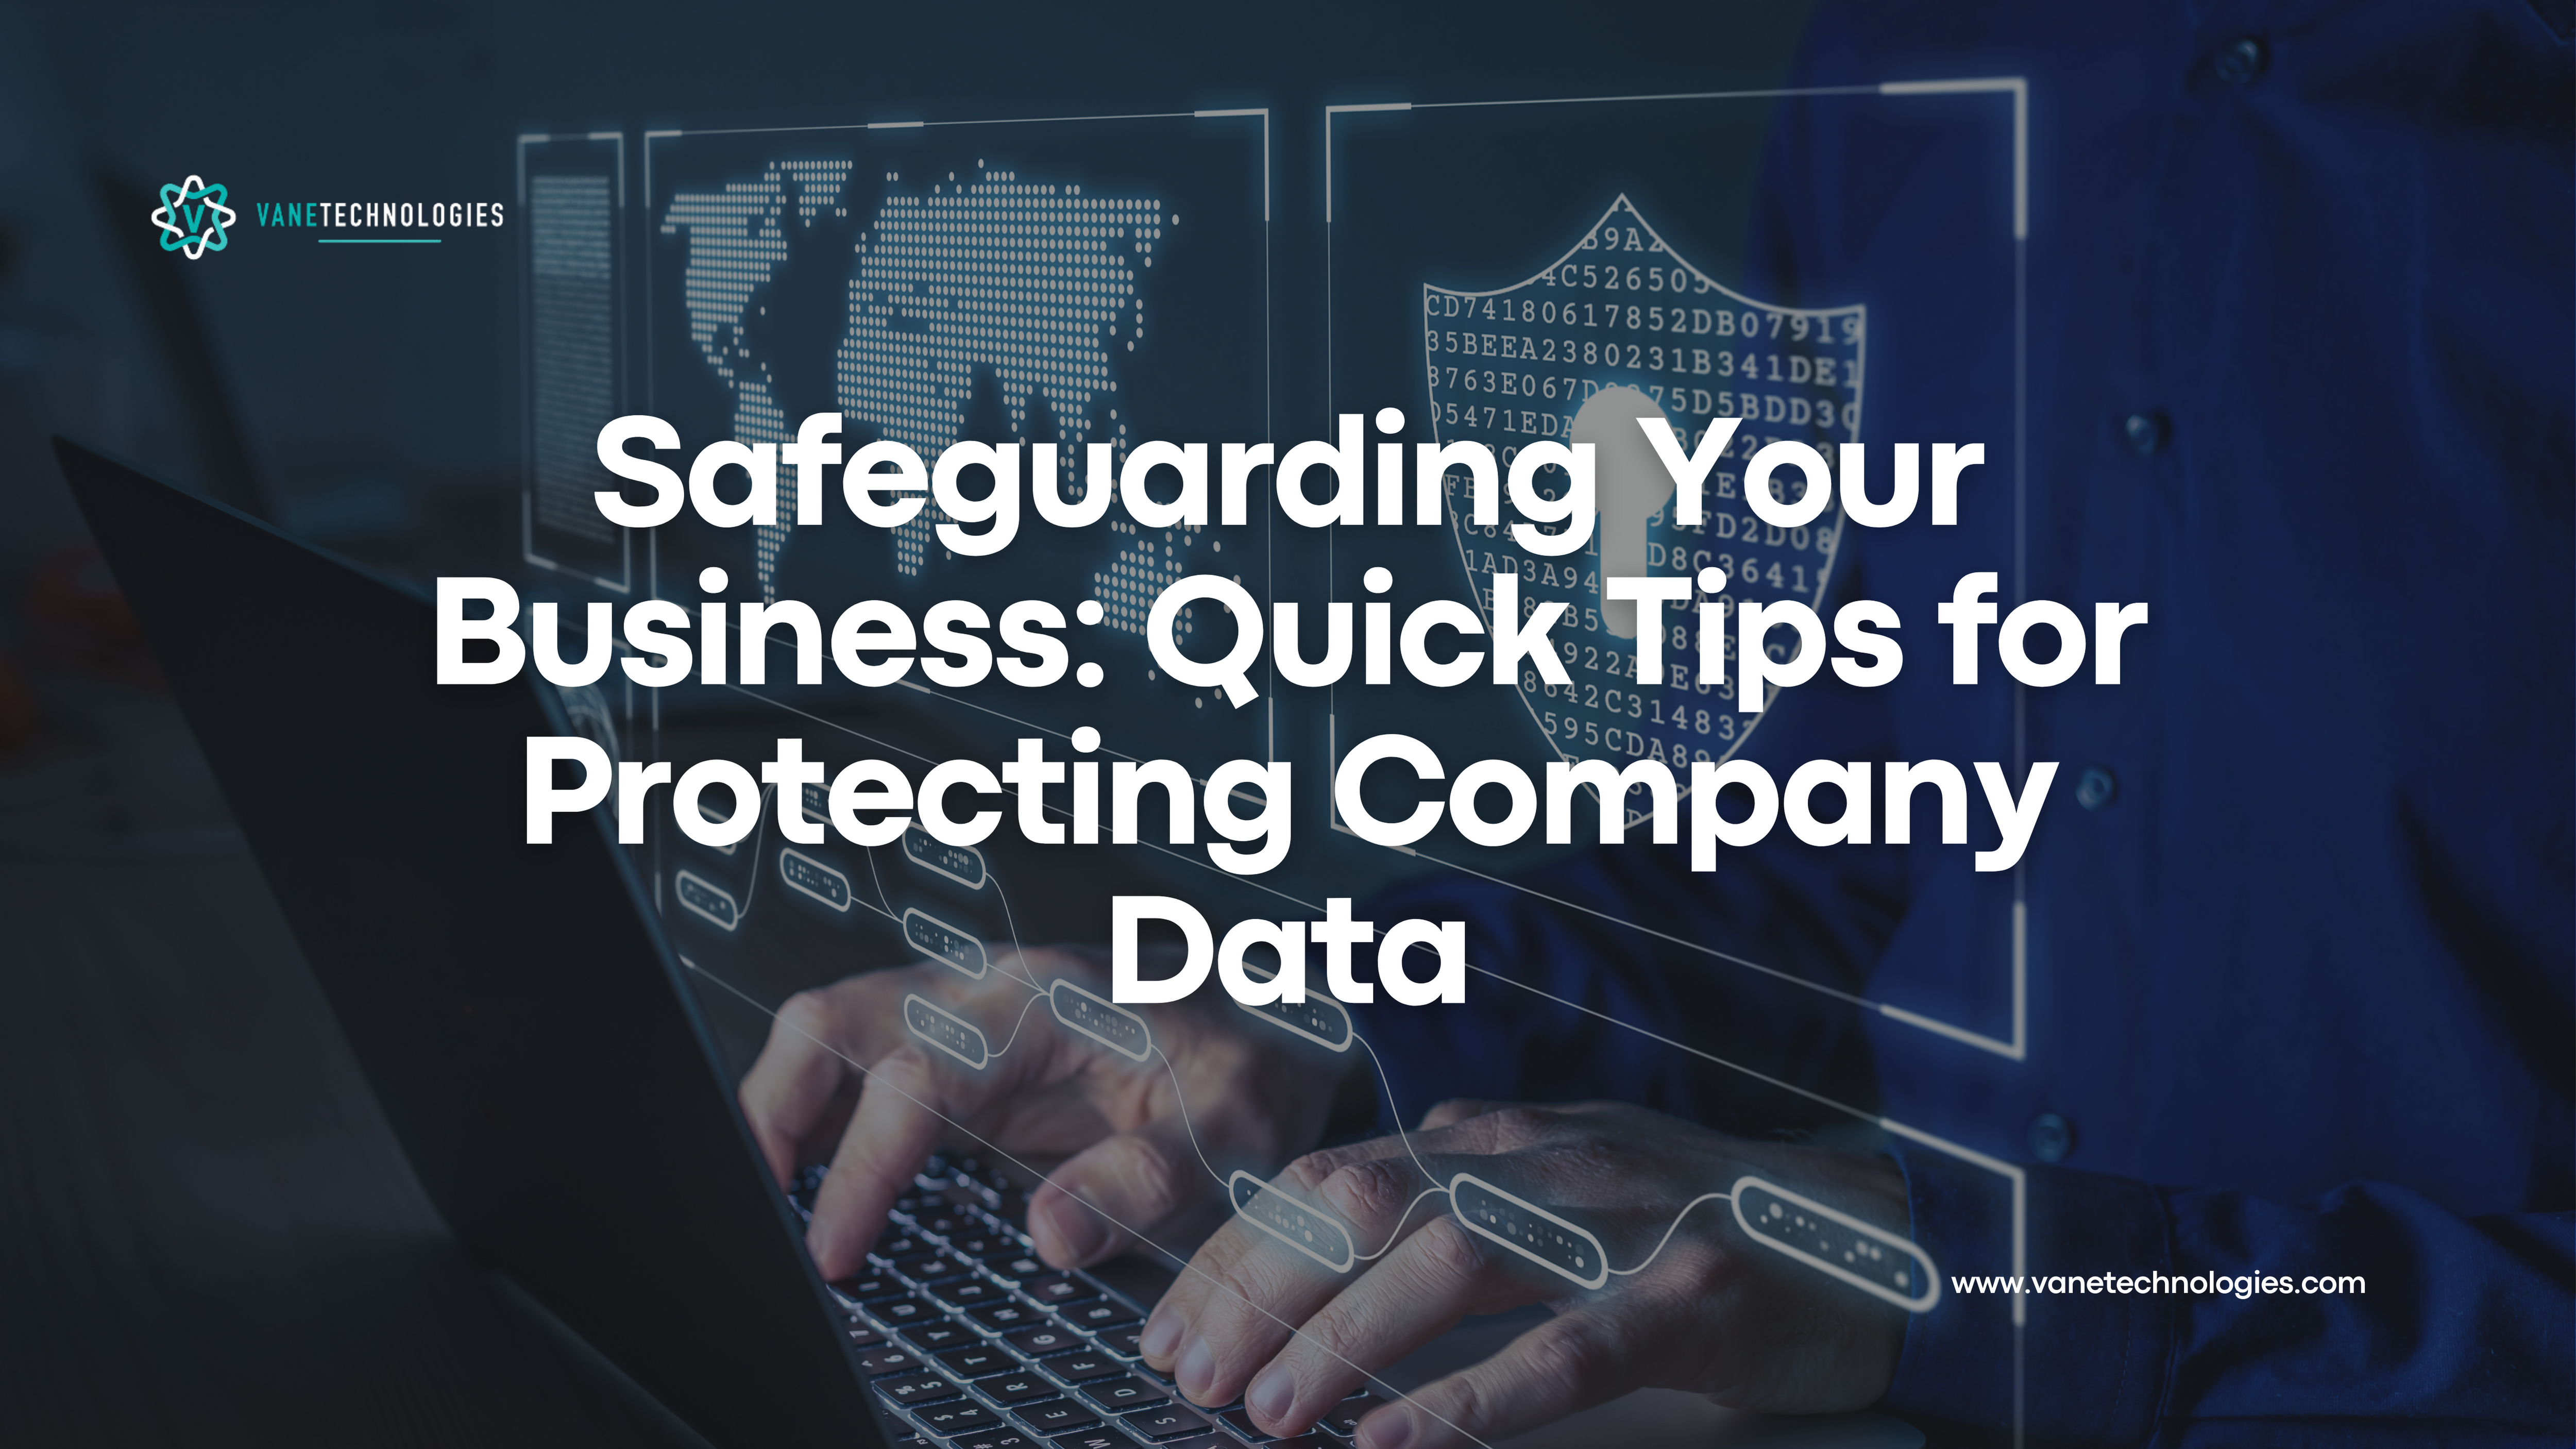 Safeguarding Your Business: Quick Tips for Protecting Company Data